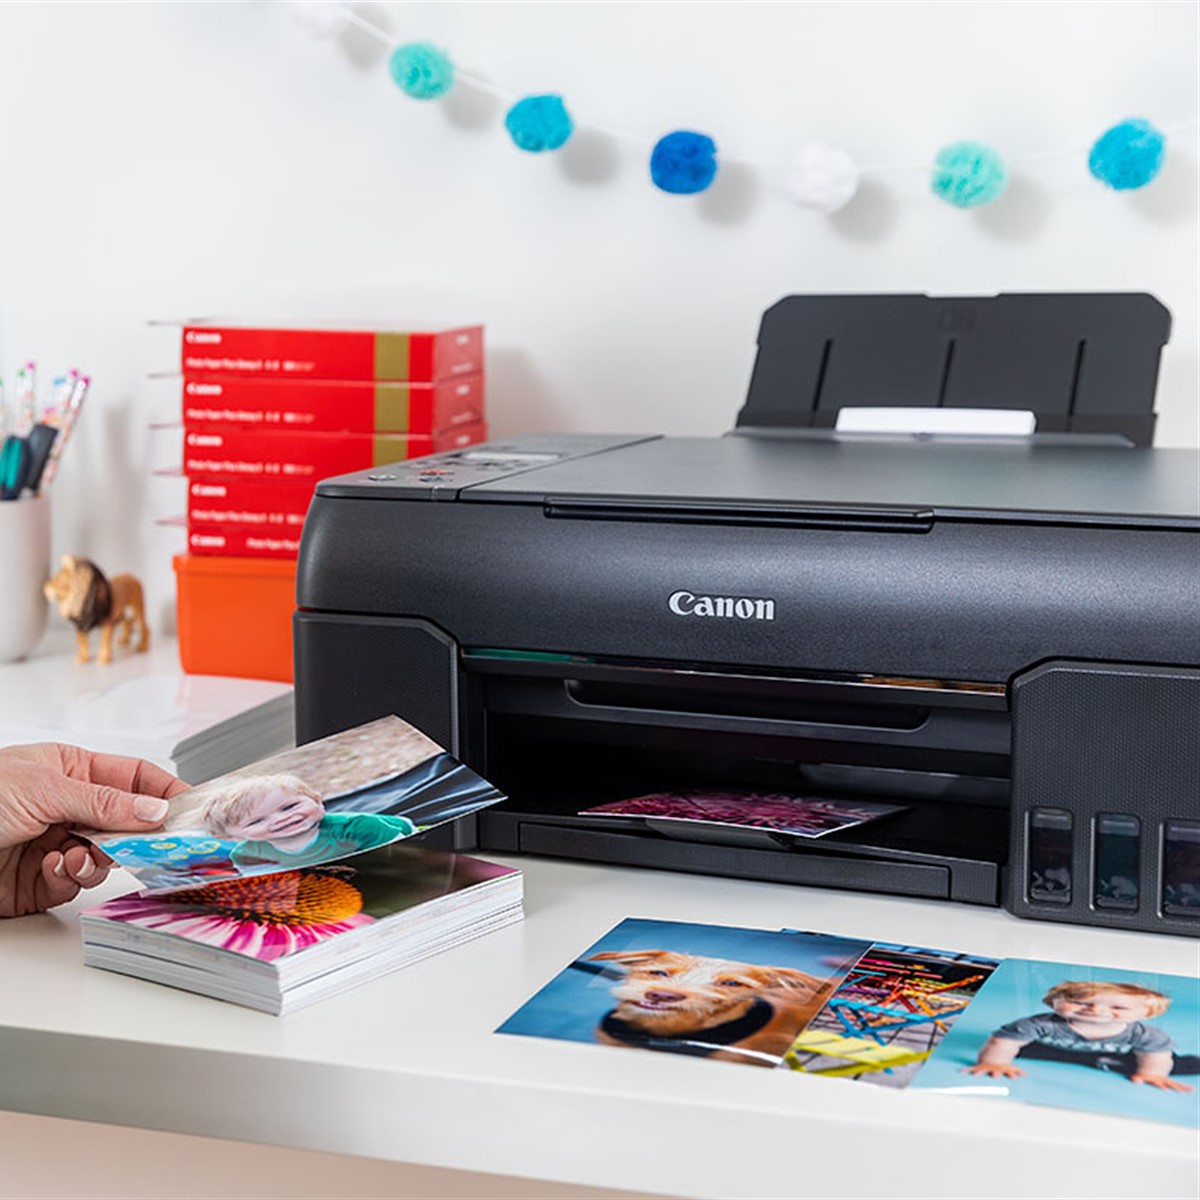 How To Print Double-Sided On A Canon Printer